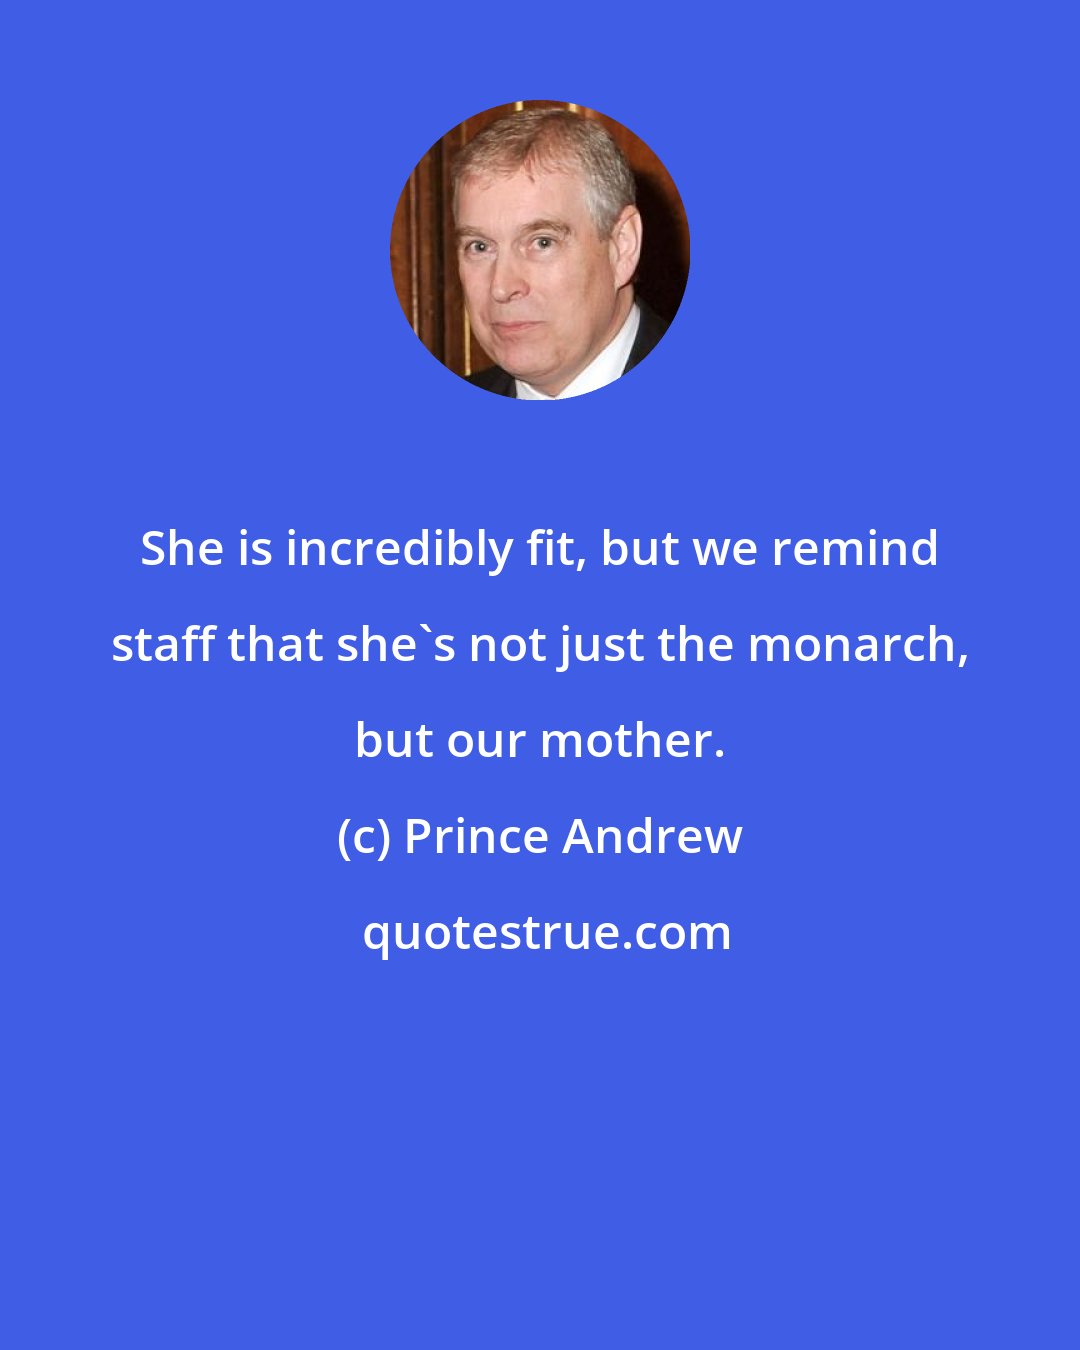 Prince Andrew: She is incredibly fit, but we remind staff that she's not just the monarch, but our mother.